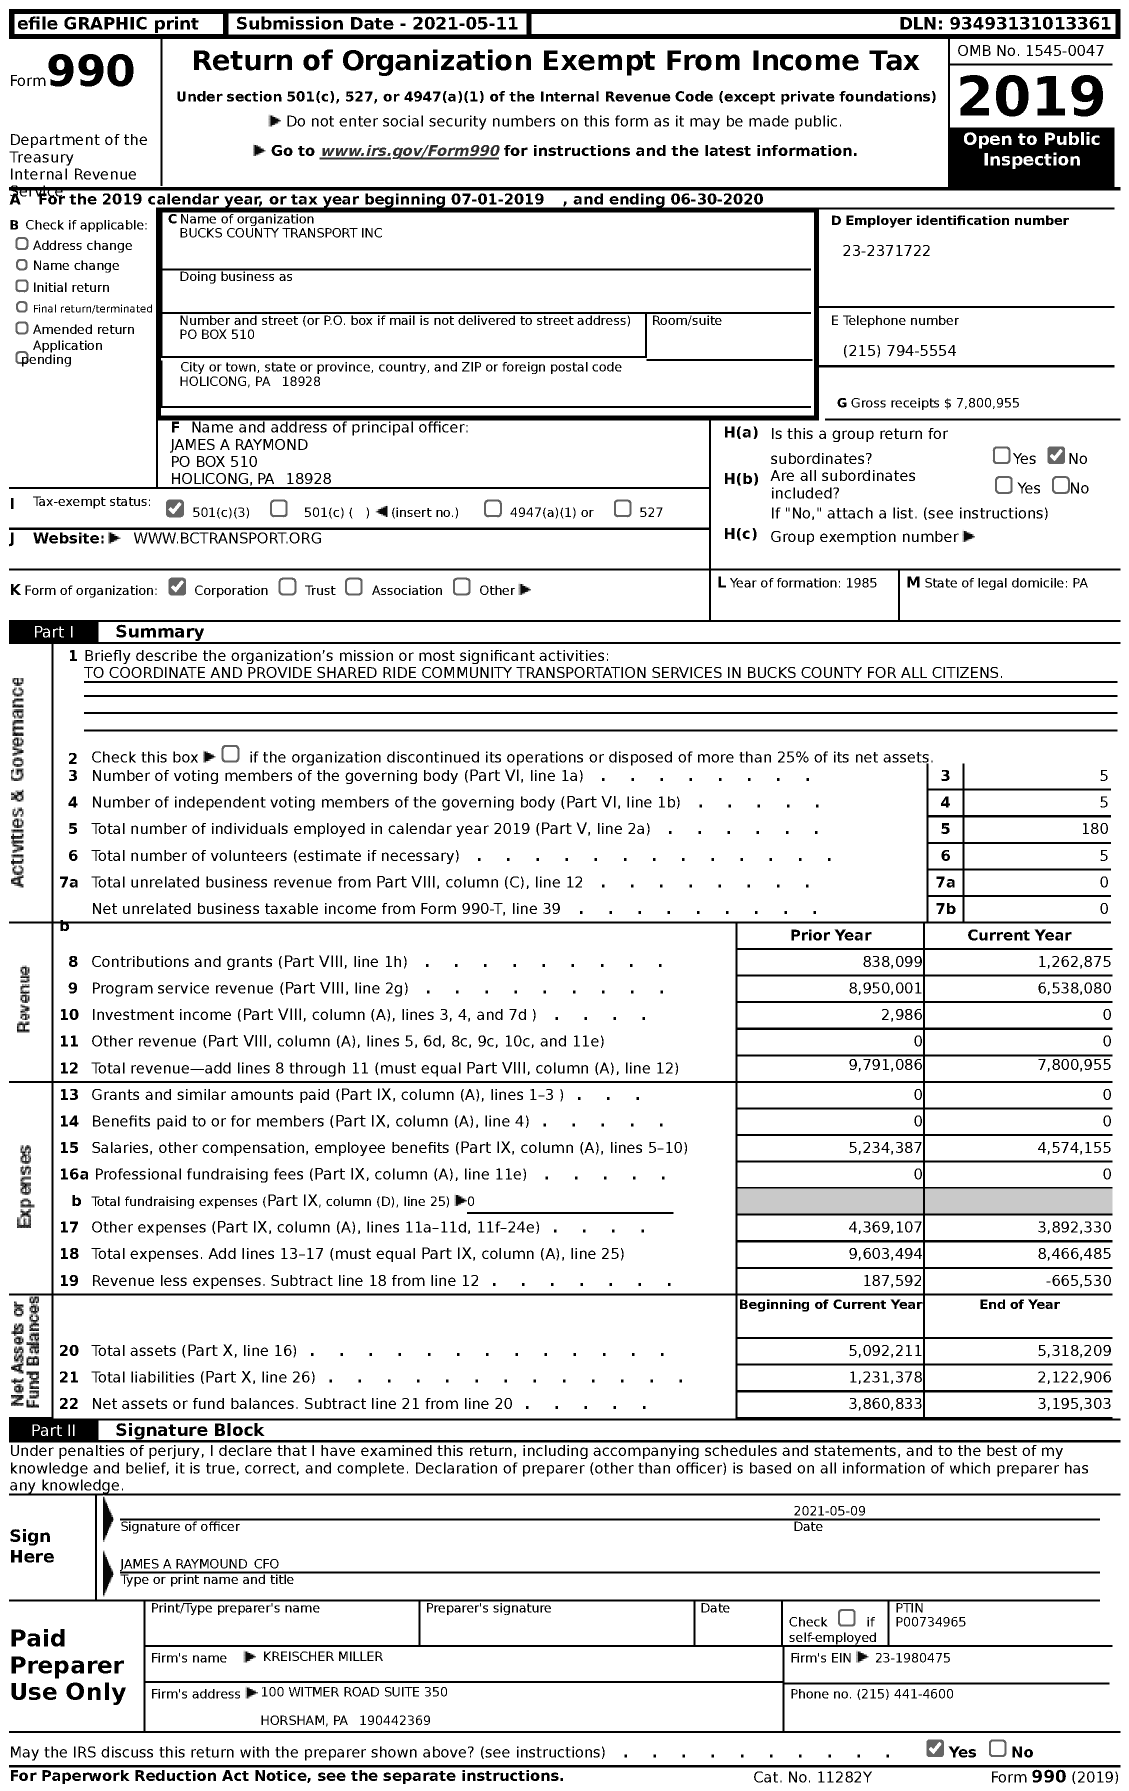 Image of first page of 2019 Form 990 for Bucks County Transport (BCT)